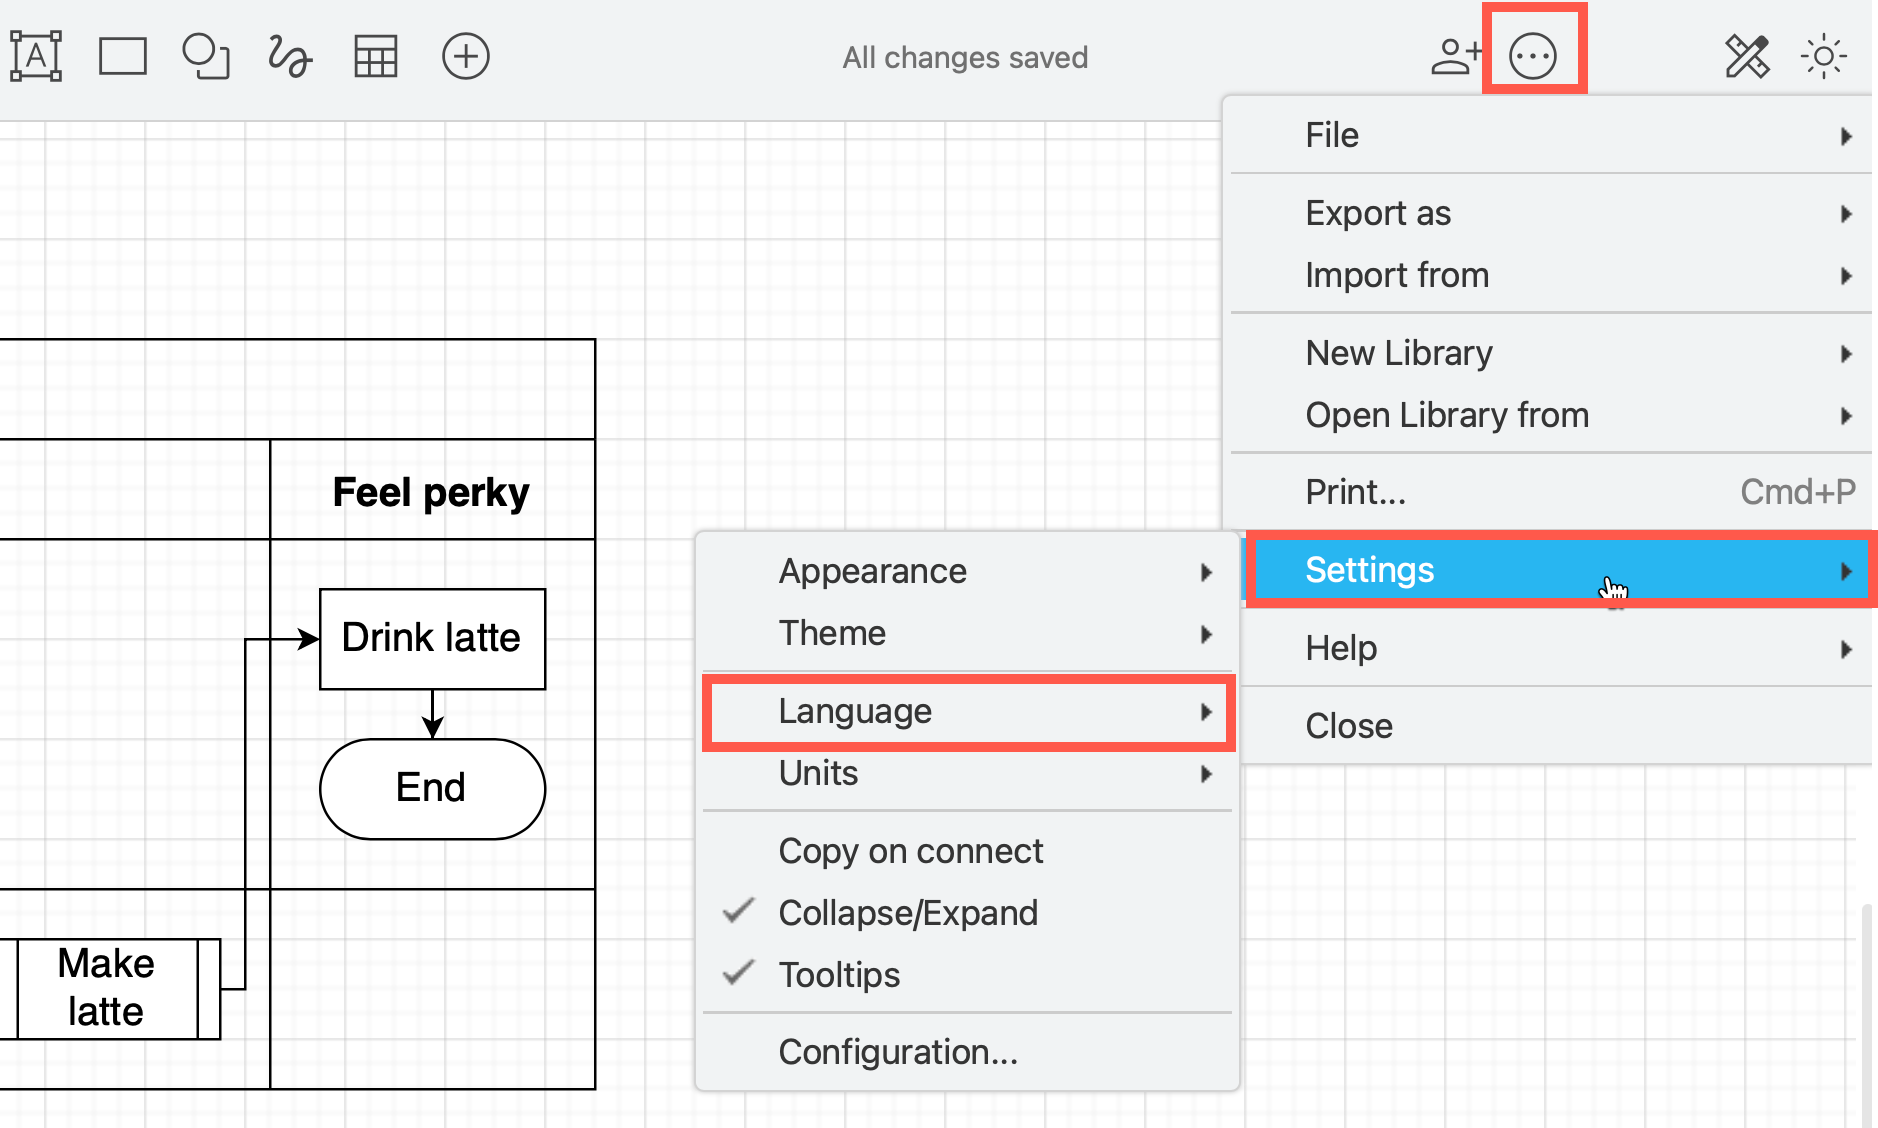 Select Settings > Language and choose the language you want to use in the draw.io menu